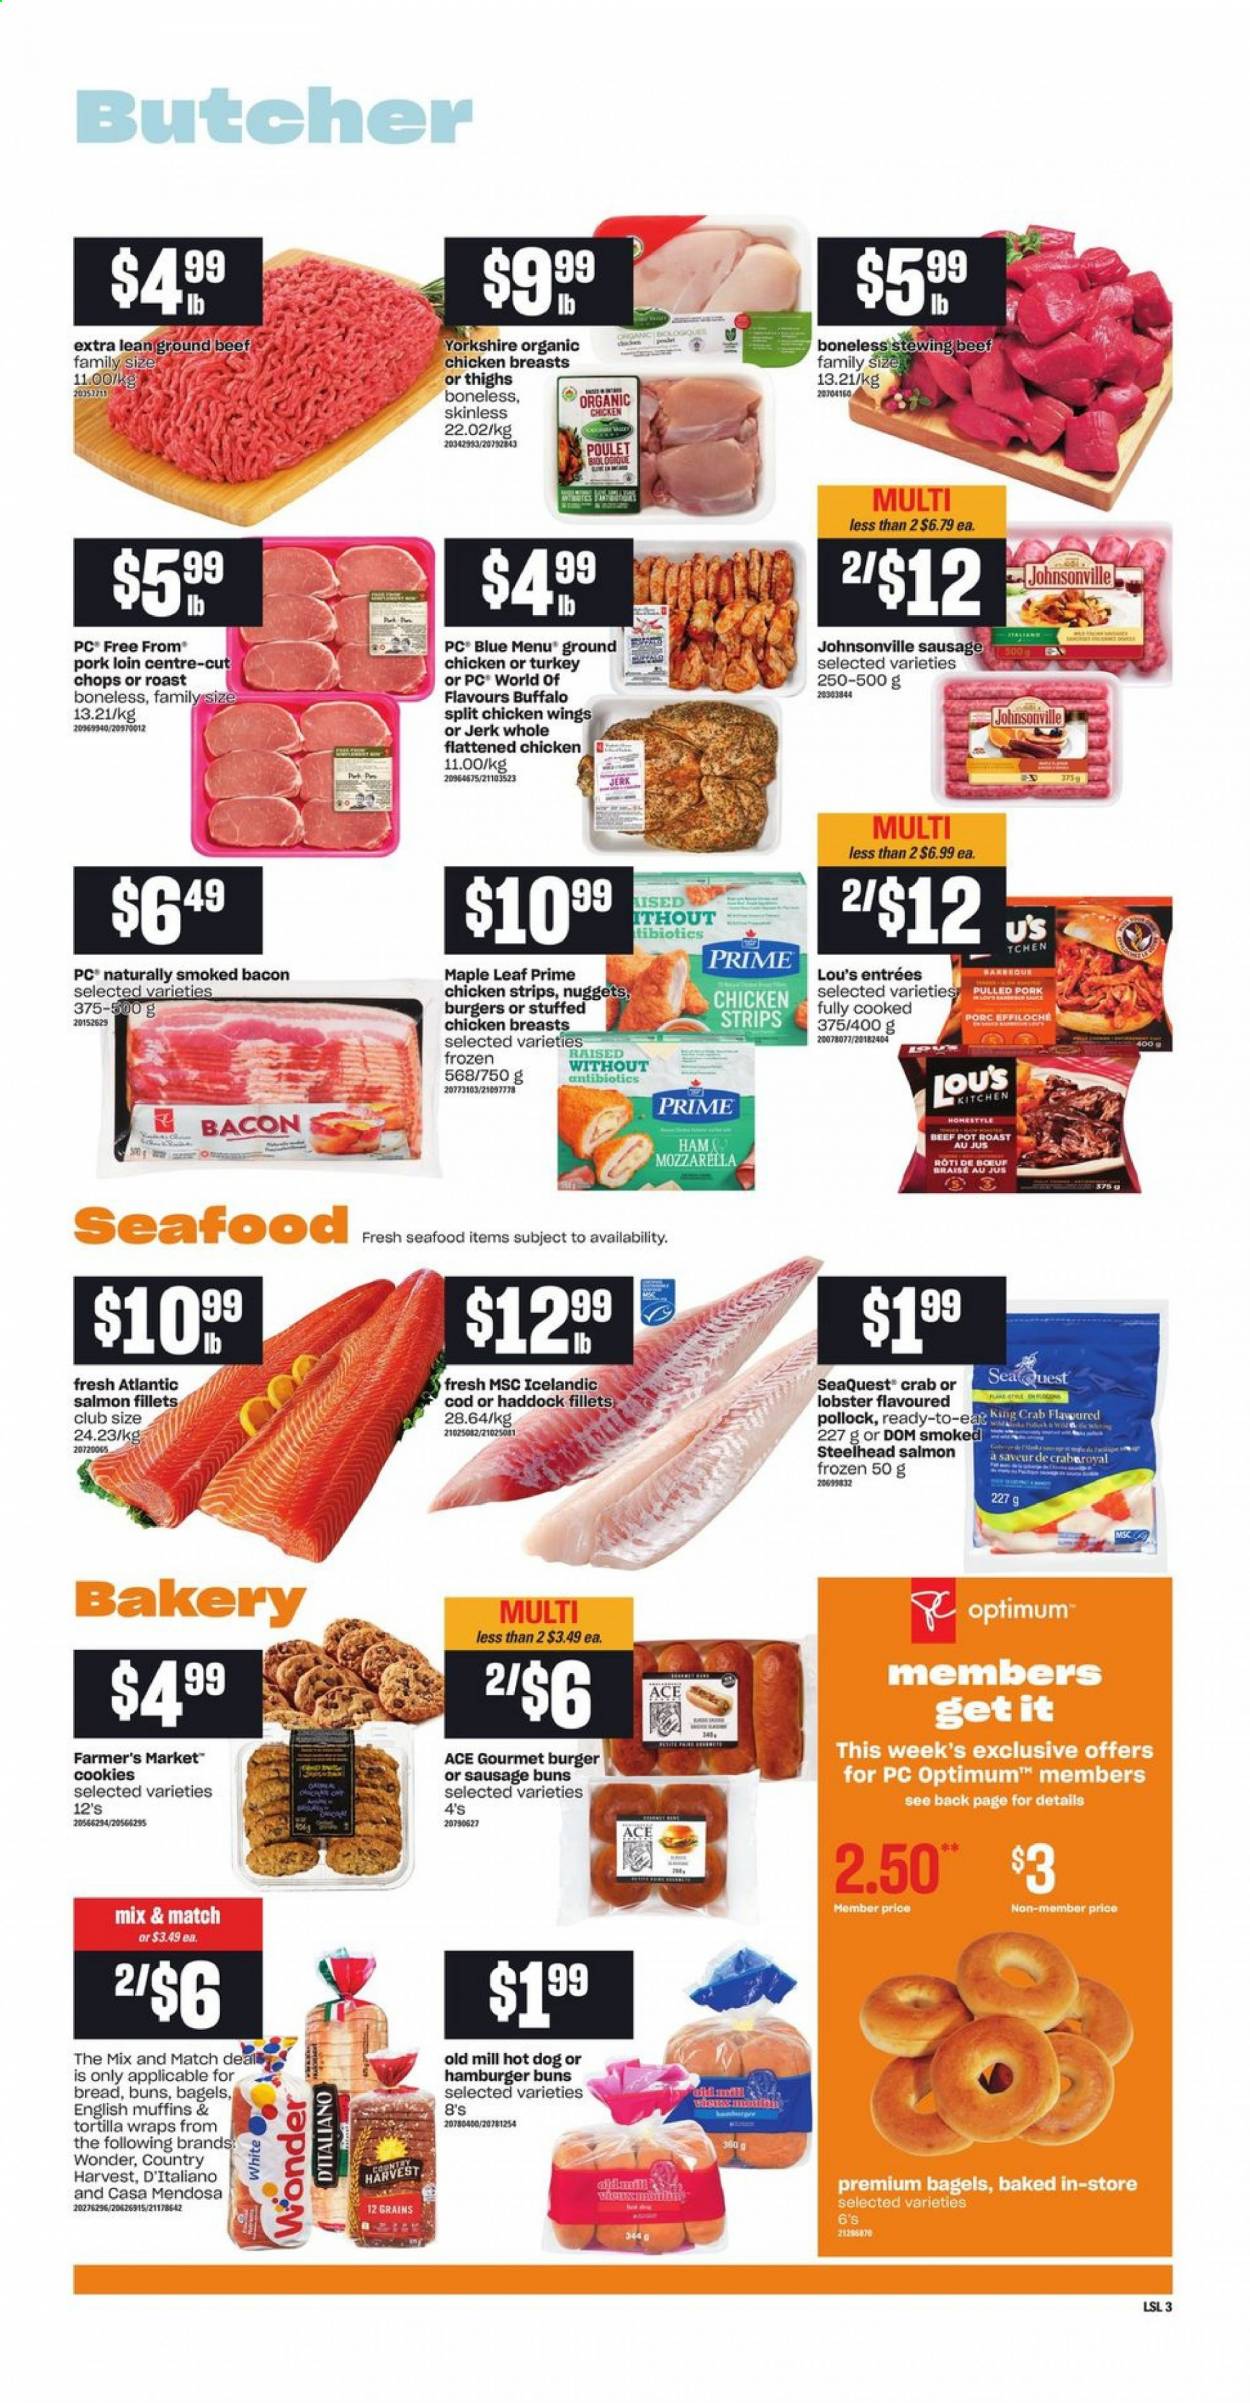 thumbnail - Loblaws Flyer - April 08, 2021 - April 14, 2021 - Sales products - bagels, english muffins, tortillas, buns, burger buns, Ace, wraps, cod, lobster, salmon, salmon fillet, haddock, king crab, pollock, seafood, crab, hot dog, nuggets, pulled pork, stuffed chicken, bacon, Johnsonville, sausage, Country Harvest, chicken wings, strips, chicken strips, cookies, ground chicken, chicken breasts, chicken, beef meat, stewing beef, pork loin, pork meat, Optimum, mozzarella. Page 4.